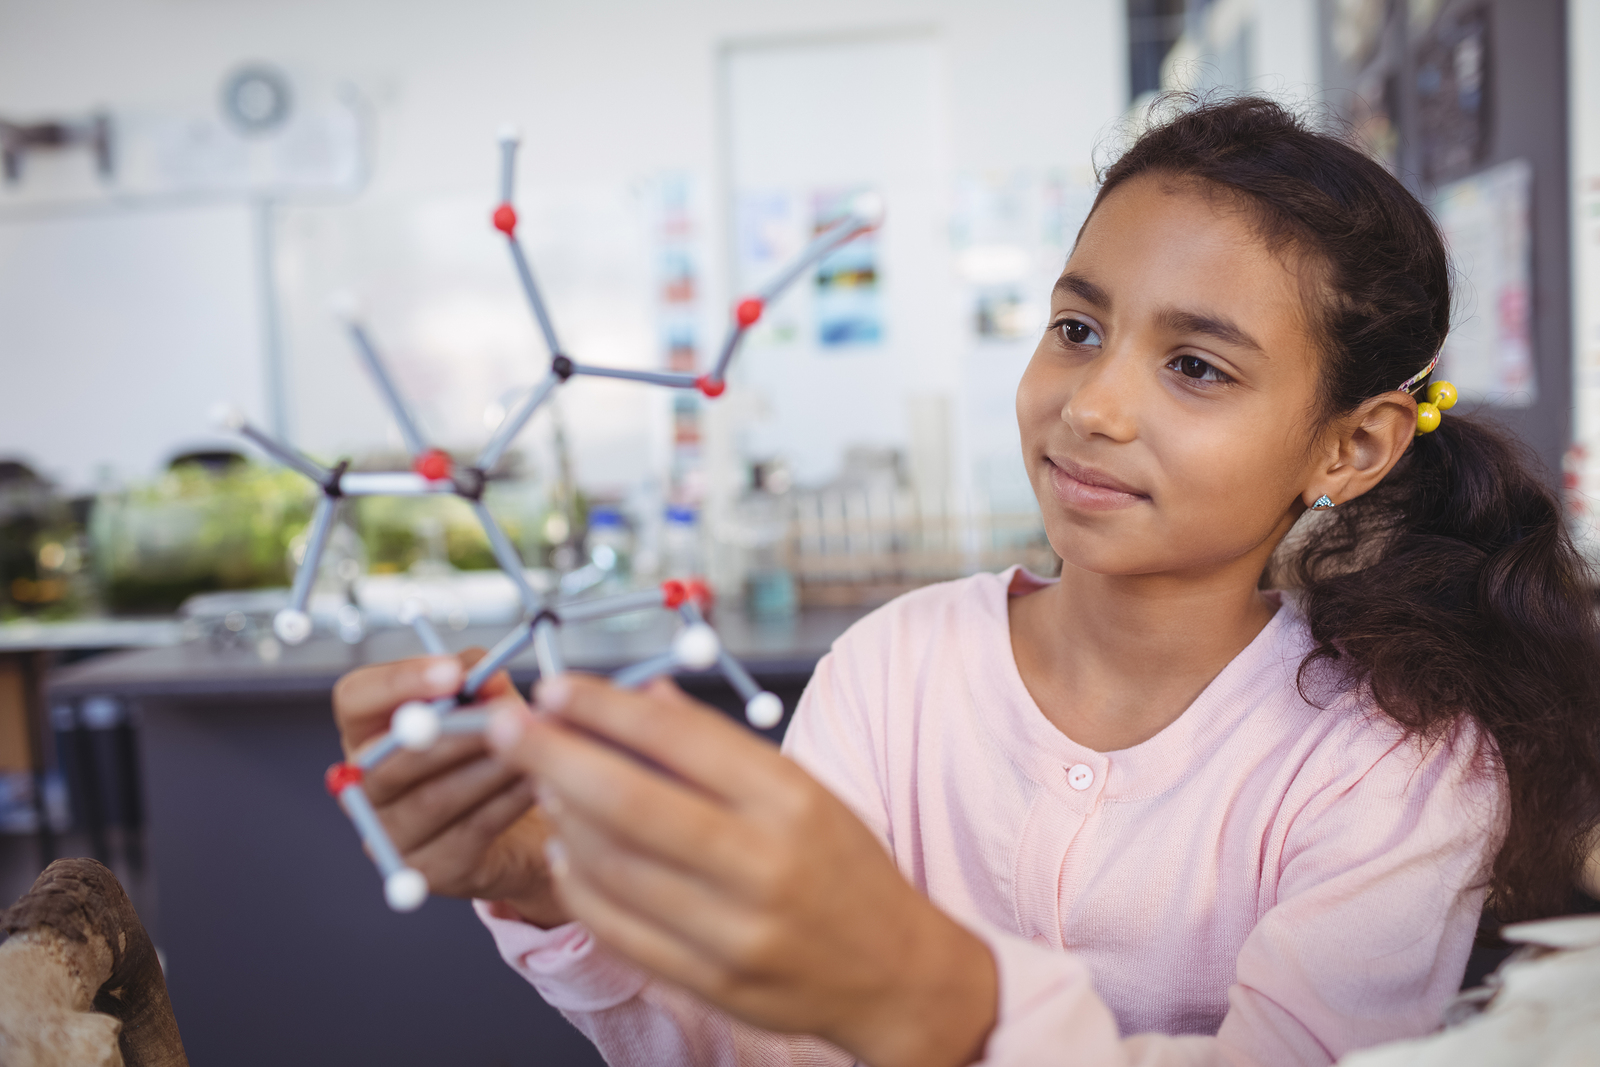 Talent and effort: girls in science